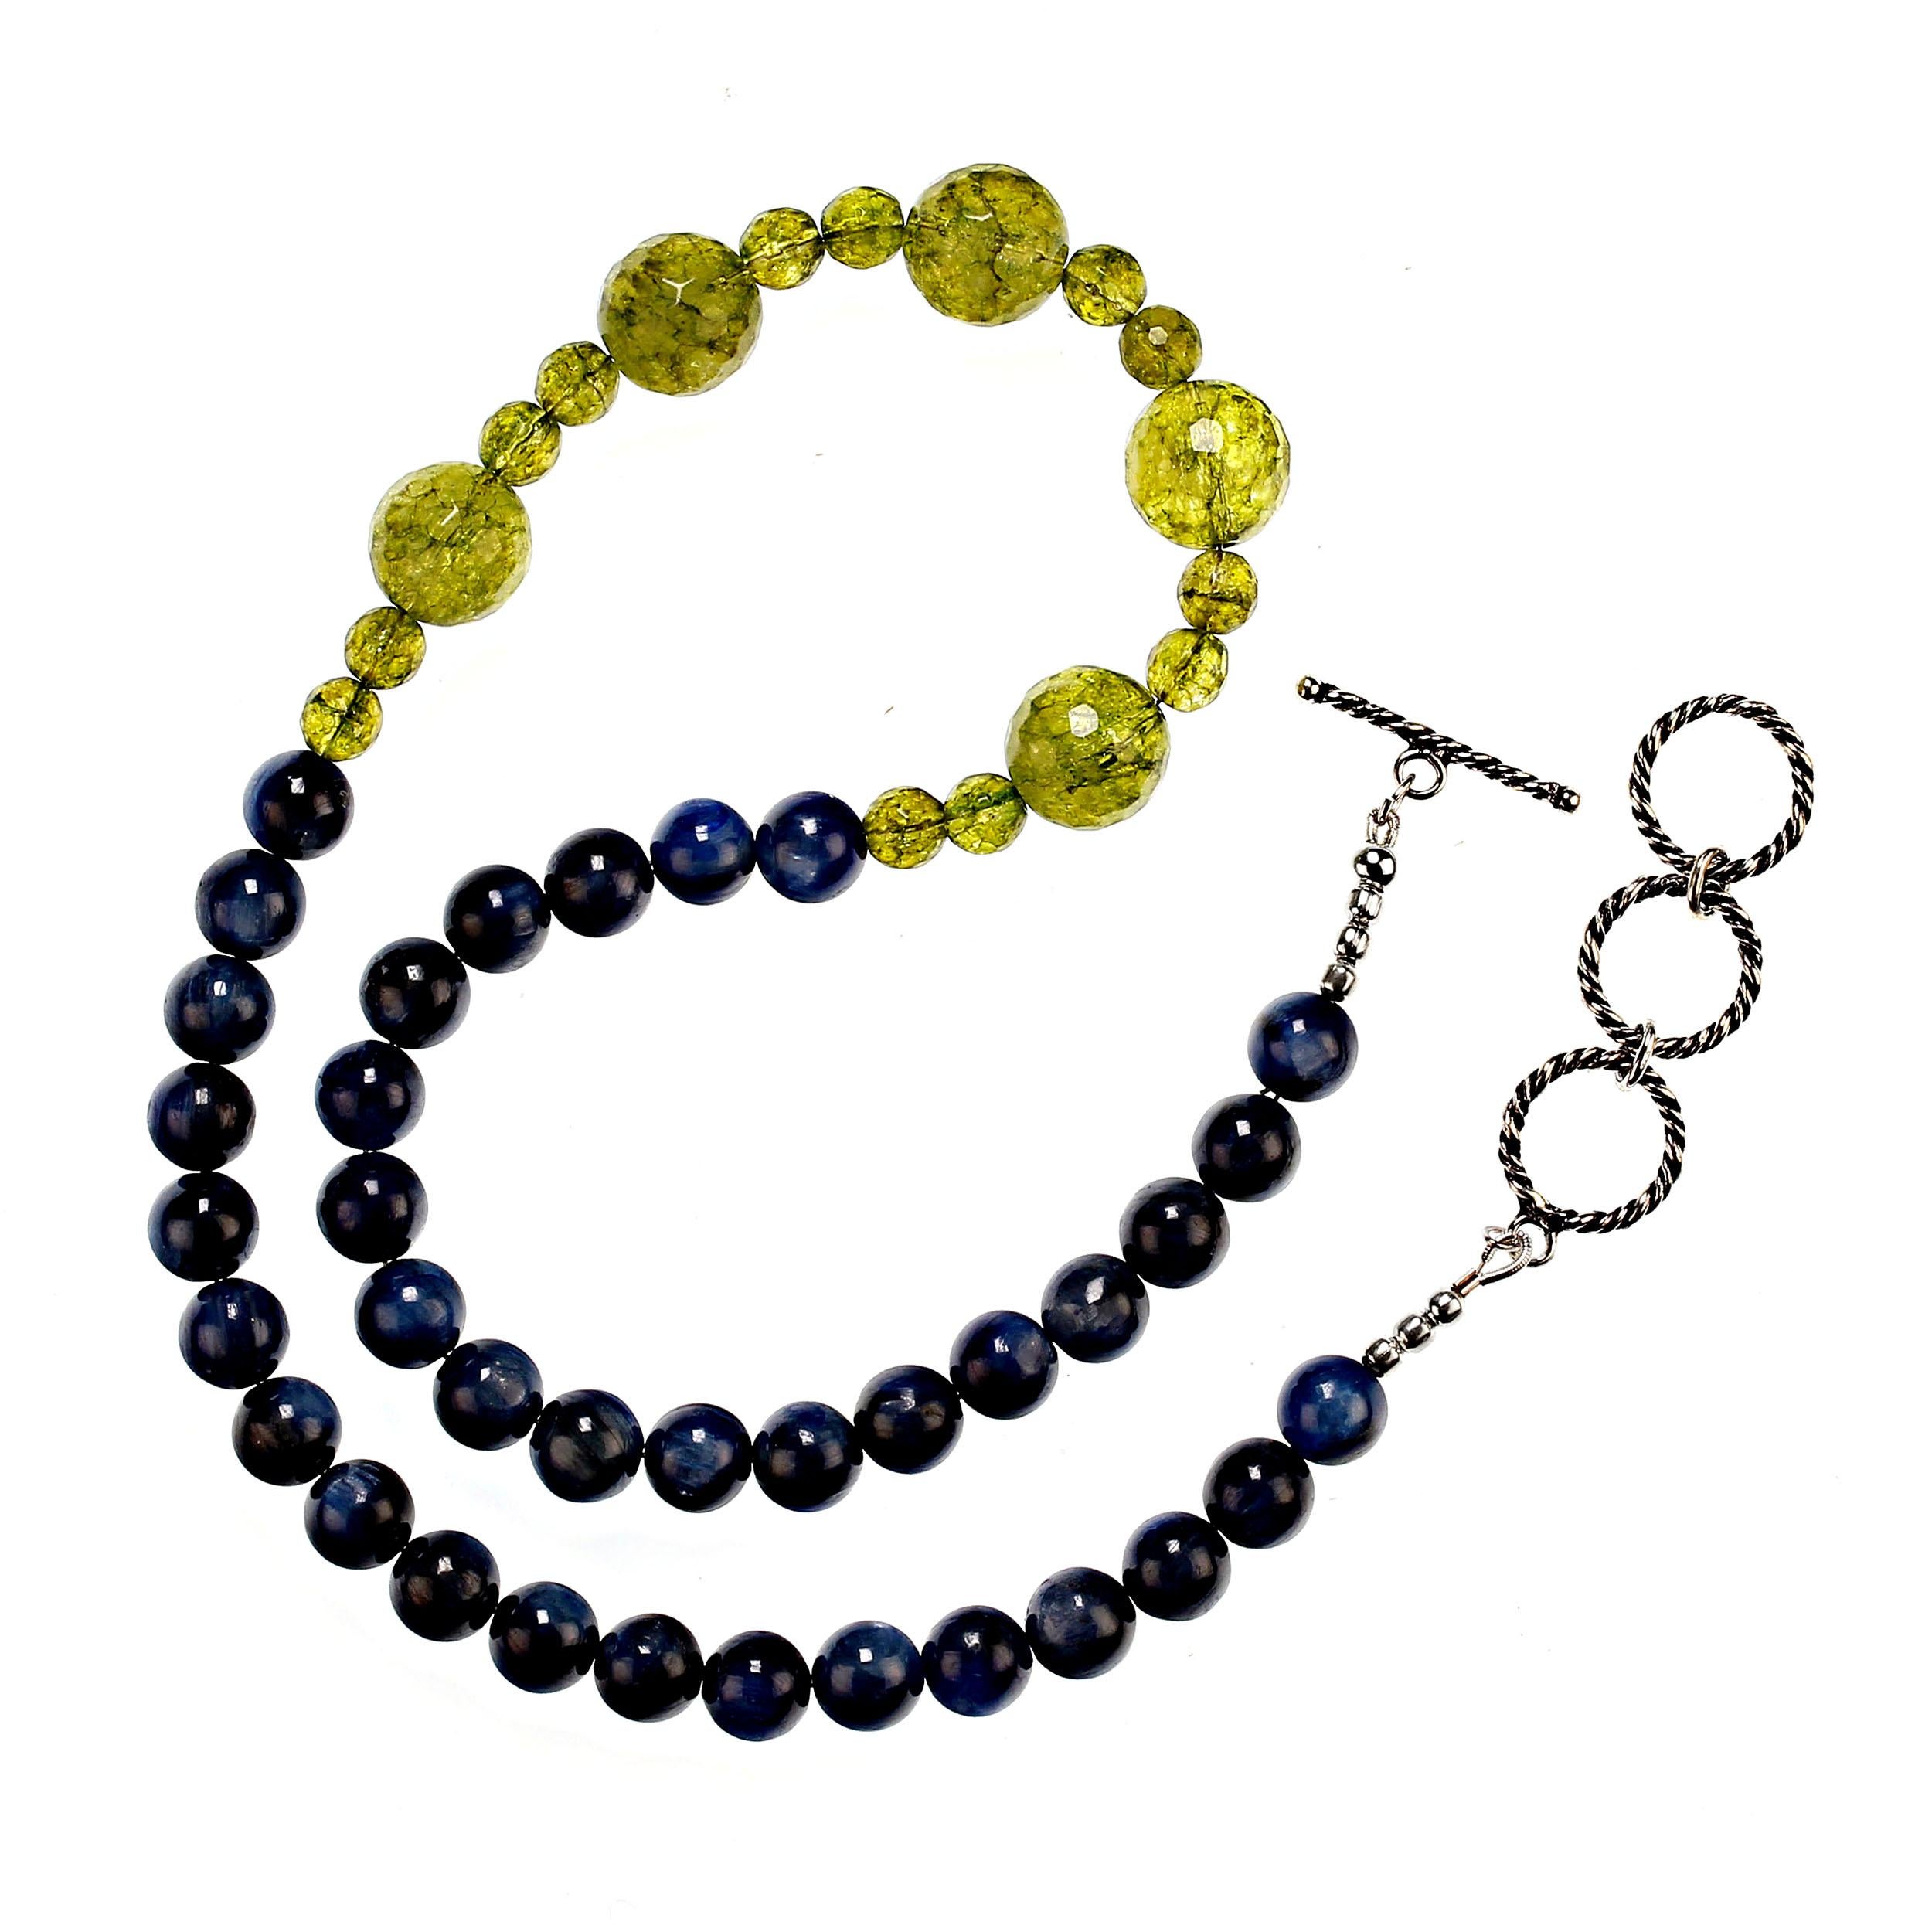 Women's or Men's AJD 19 Inch Unique Peridot and Kyanite Necklace Perfect for Winter  Great Gift! For Sale